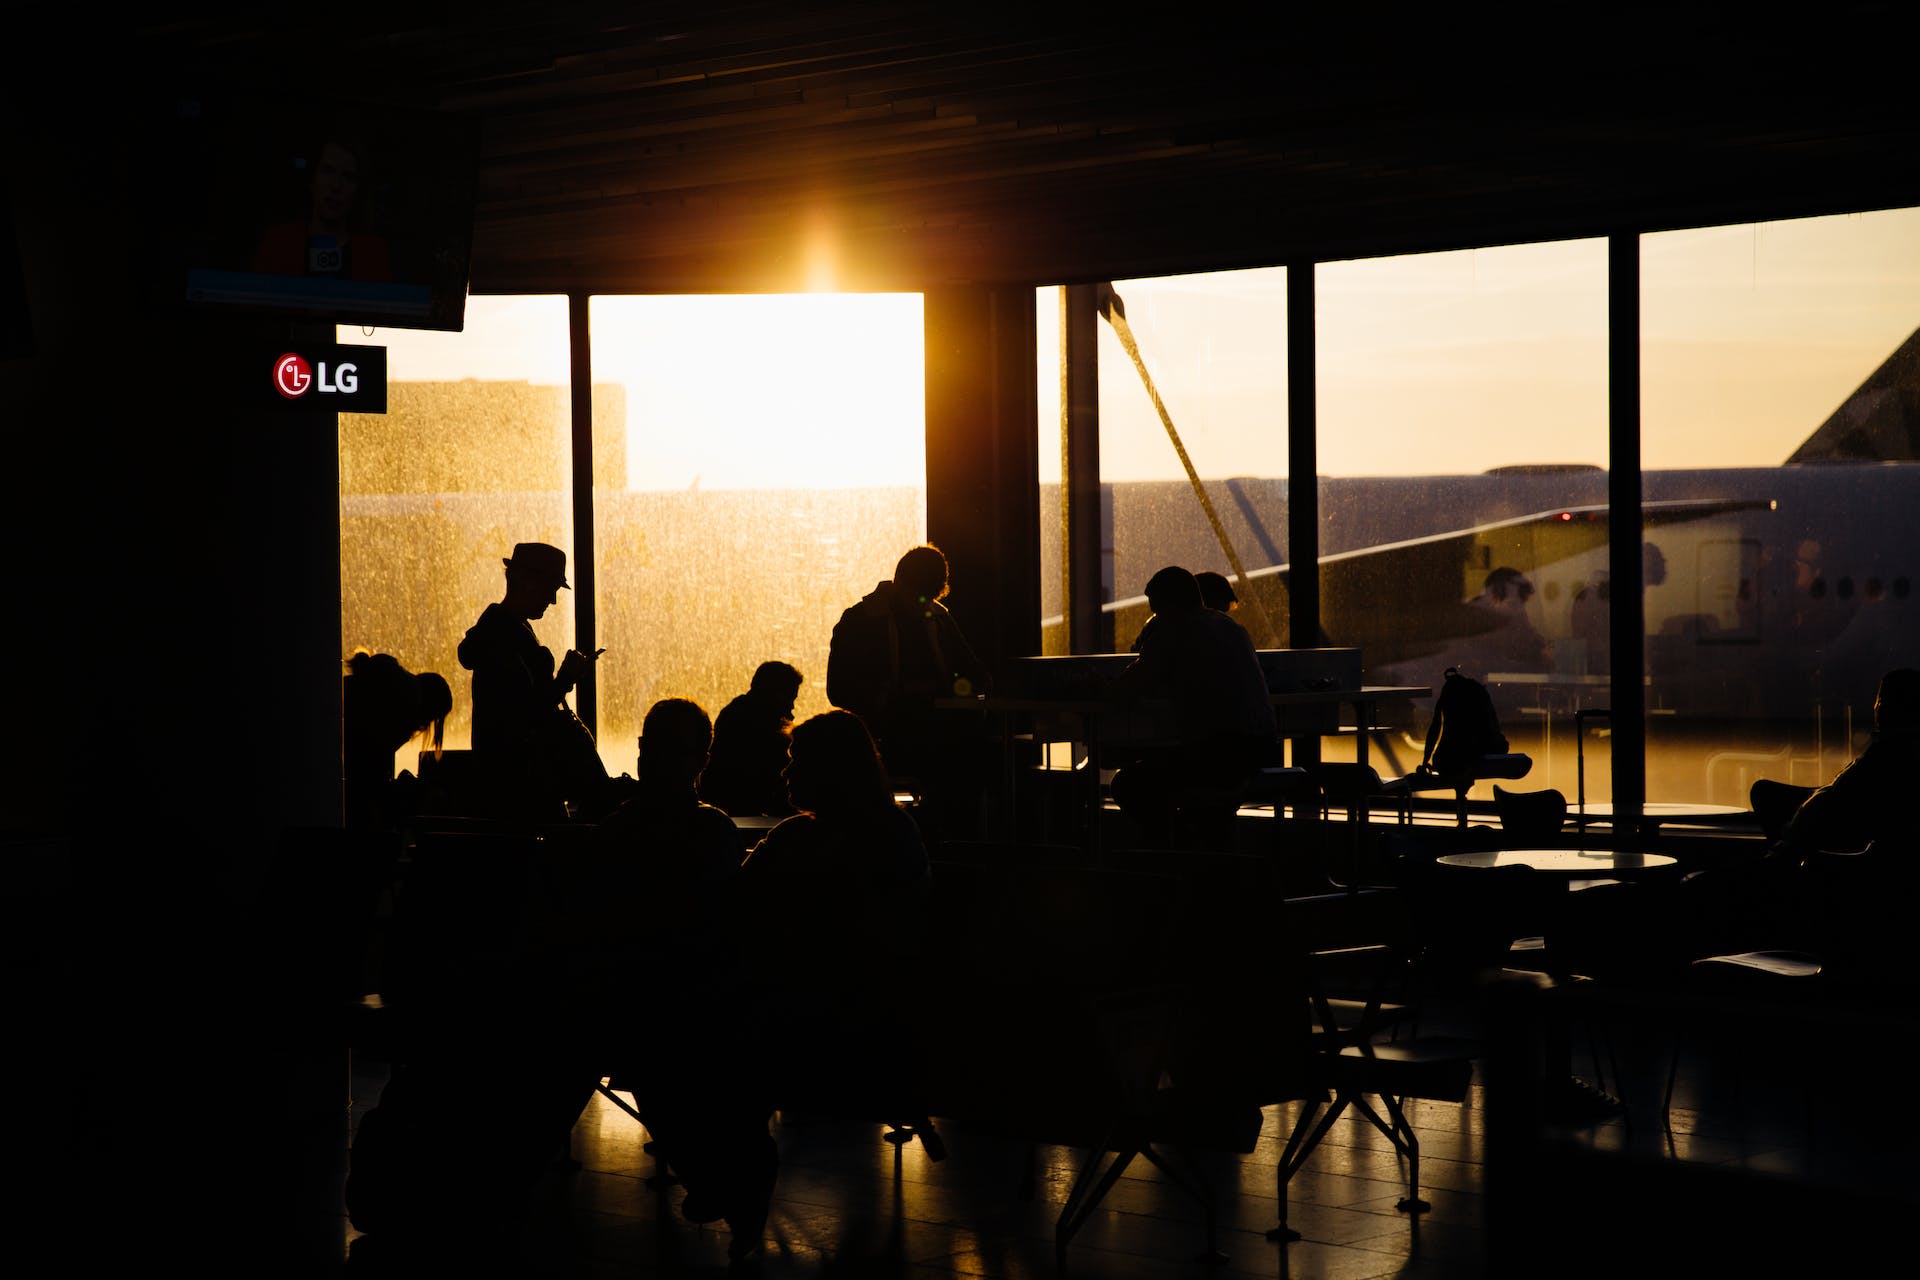 People sitting in an airport | Source: Pexels